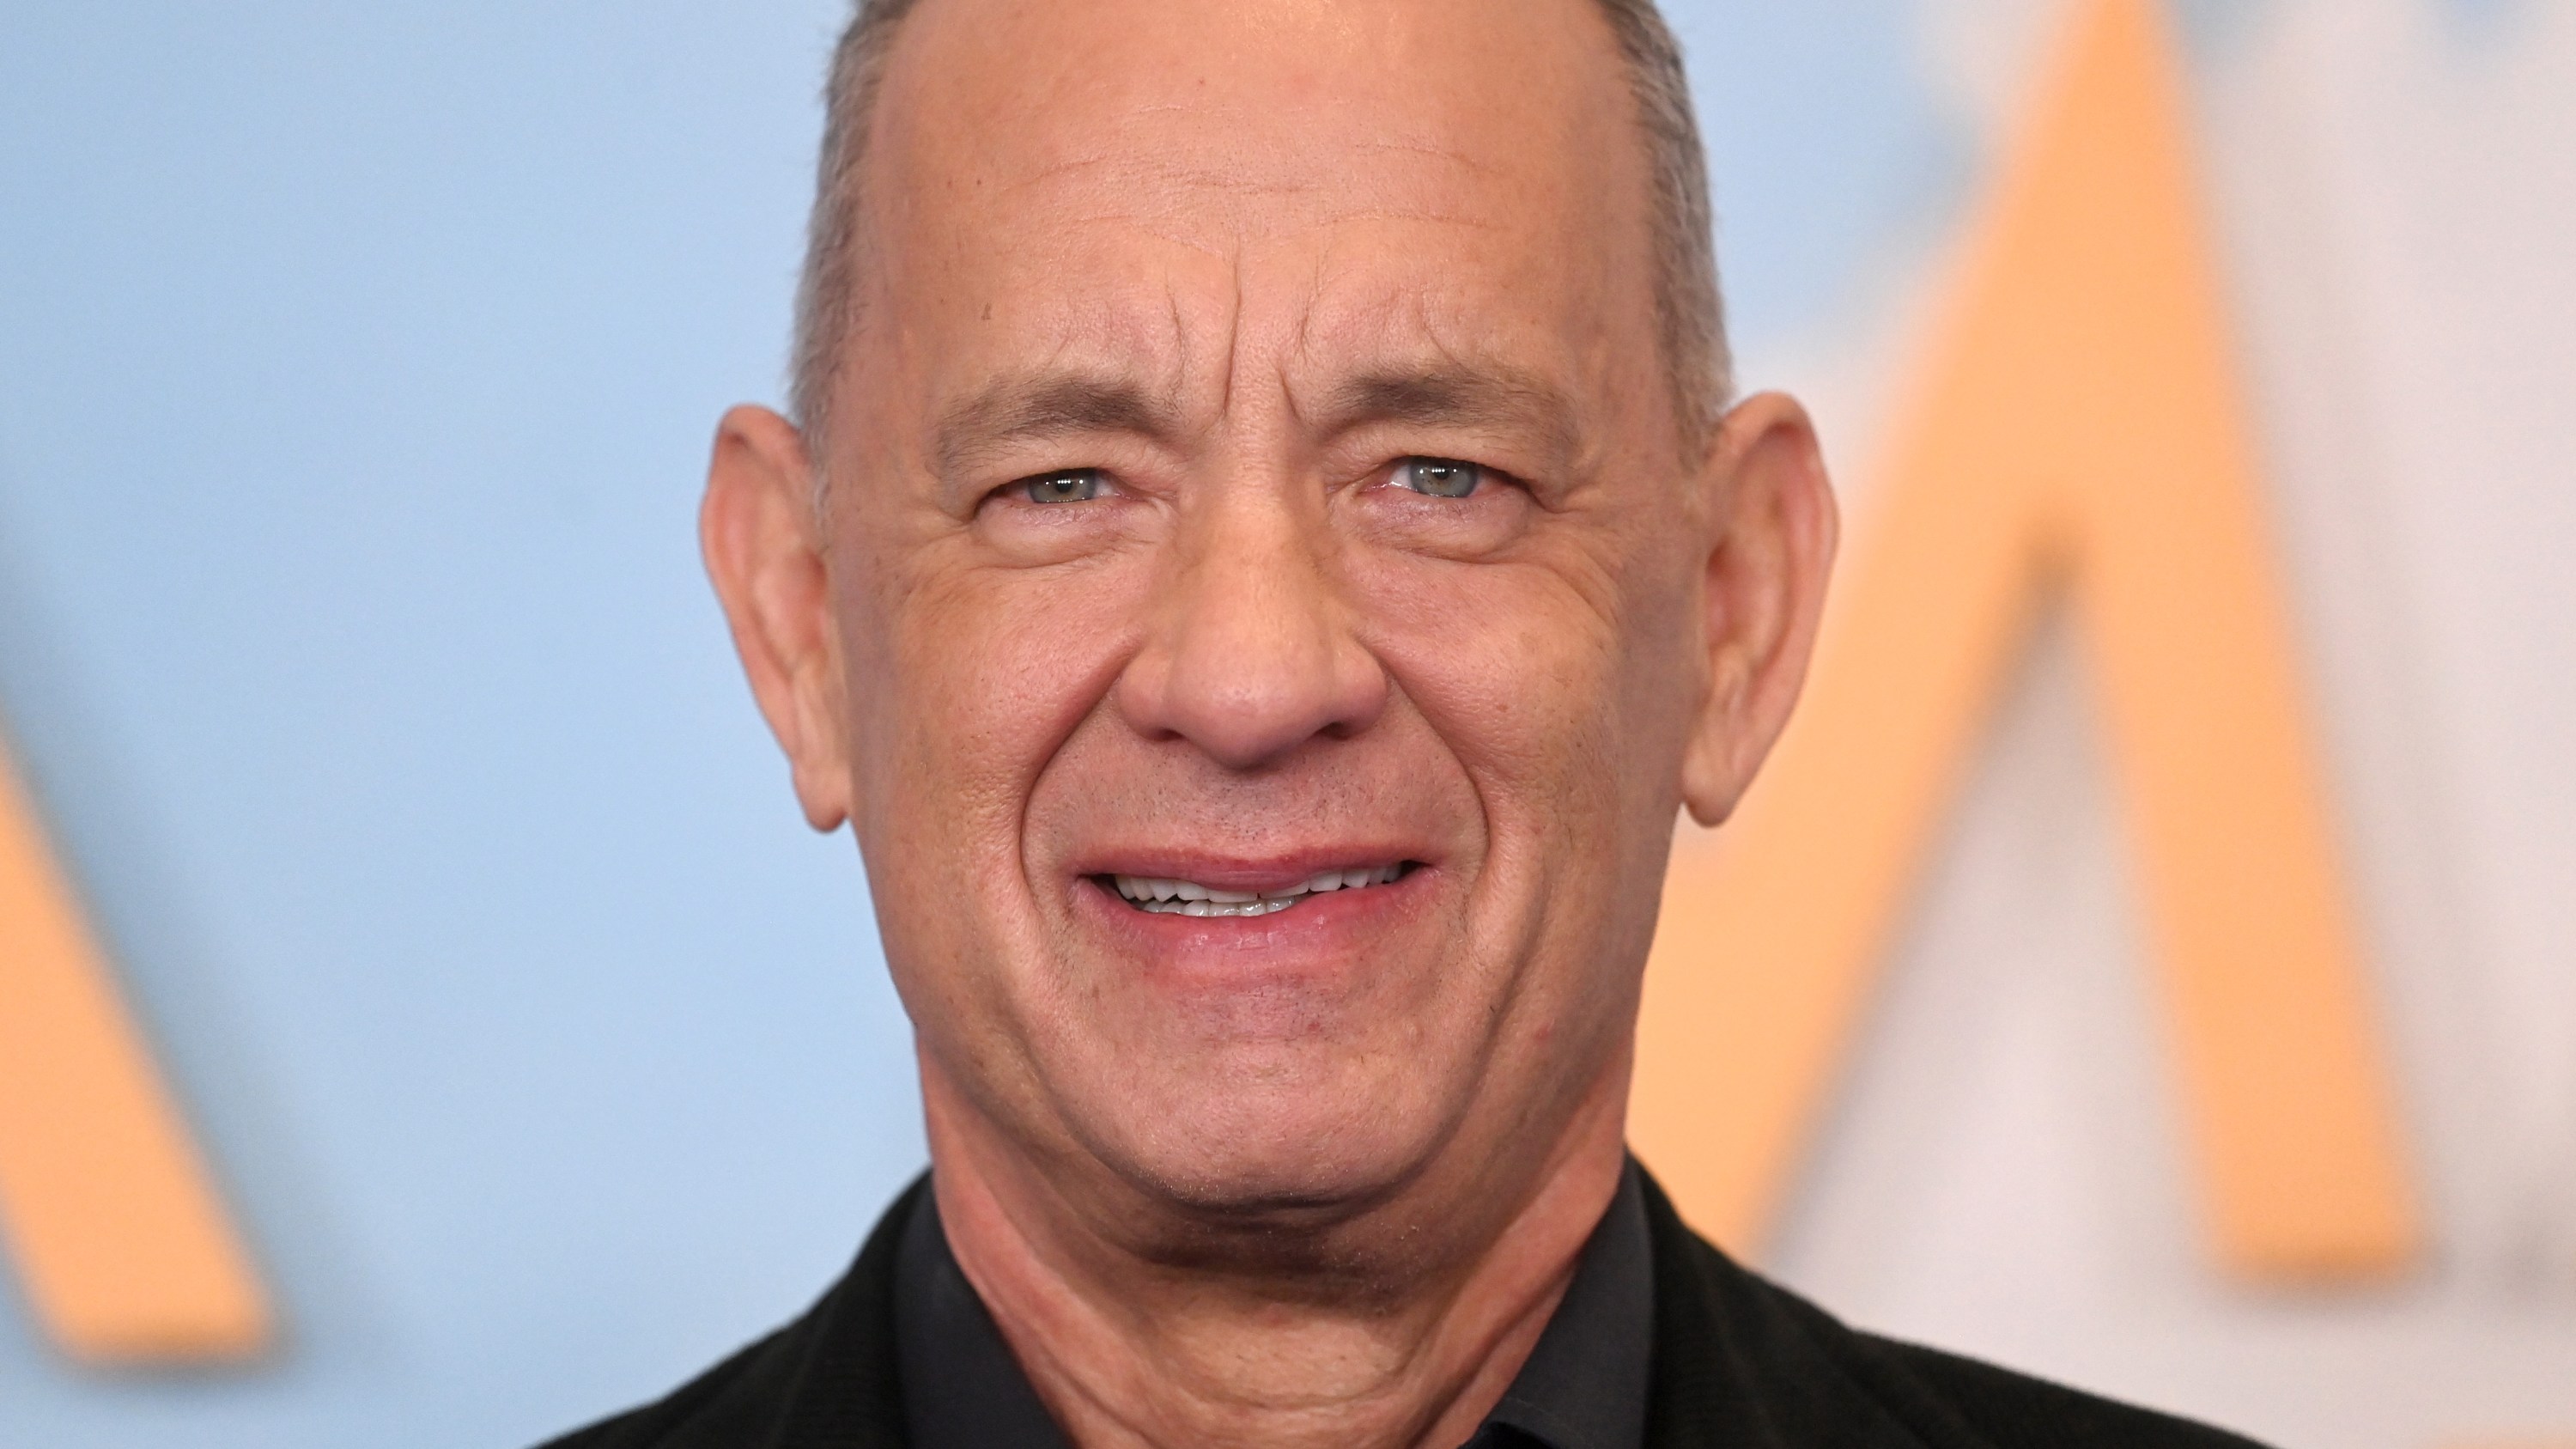 Tom Hanks at "A Man Called Otto" event